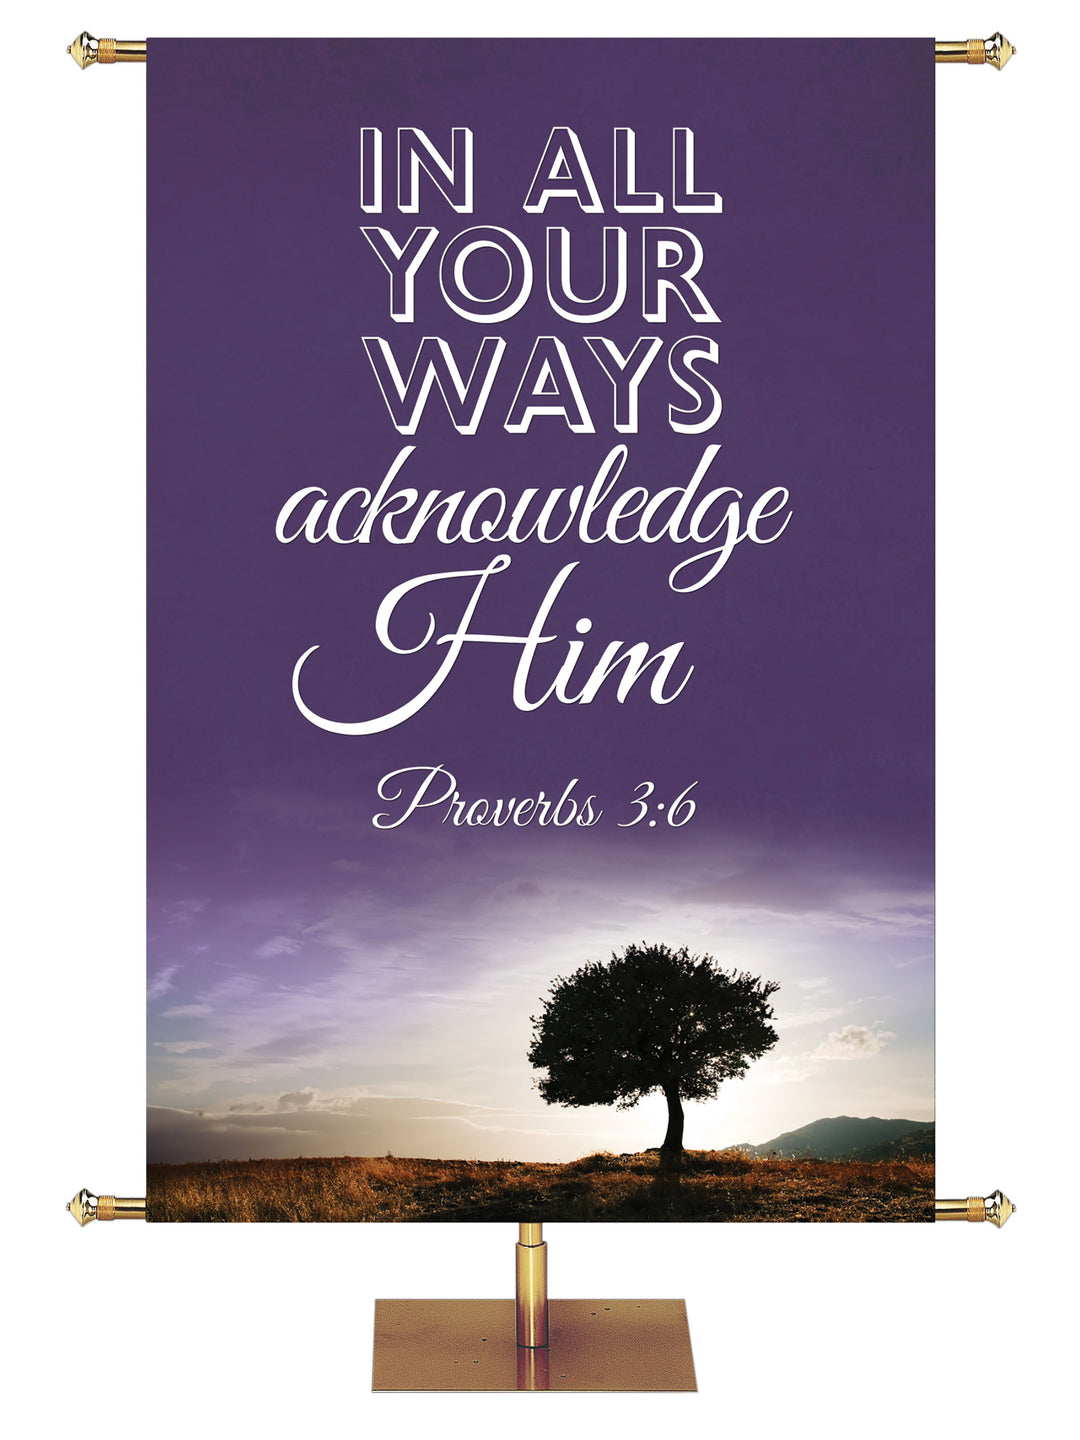 Acknowledge Him Banner Words of Wisdom Proverbs 3:6 in 6 Color Options